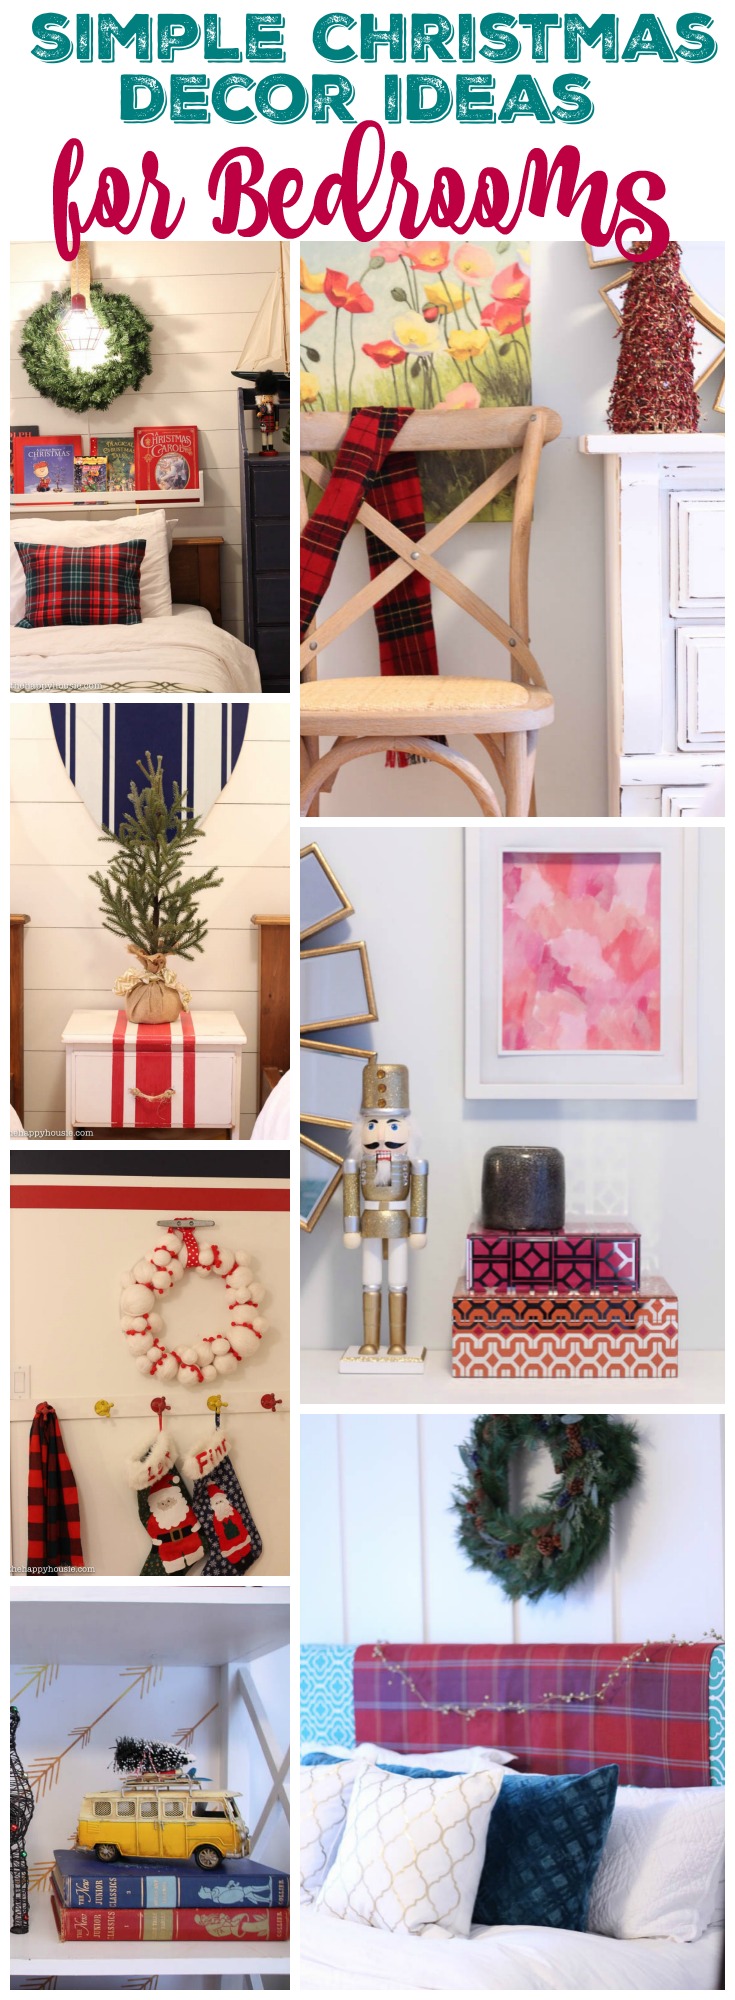 Simple quick Christmas Decor Ideas for Bedrooms at thehappyhousie.com